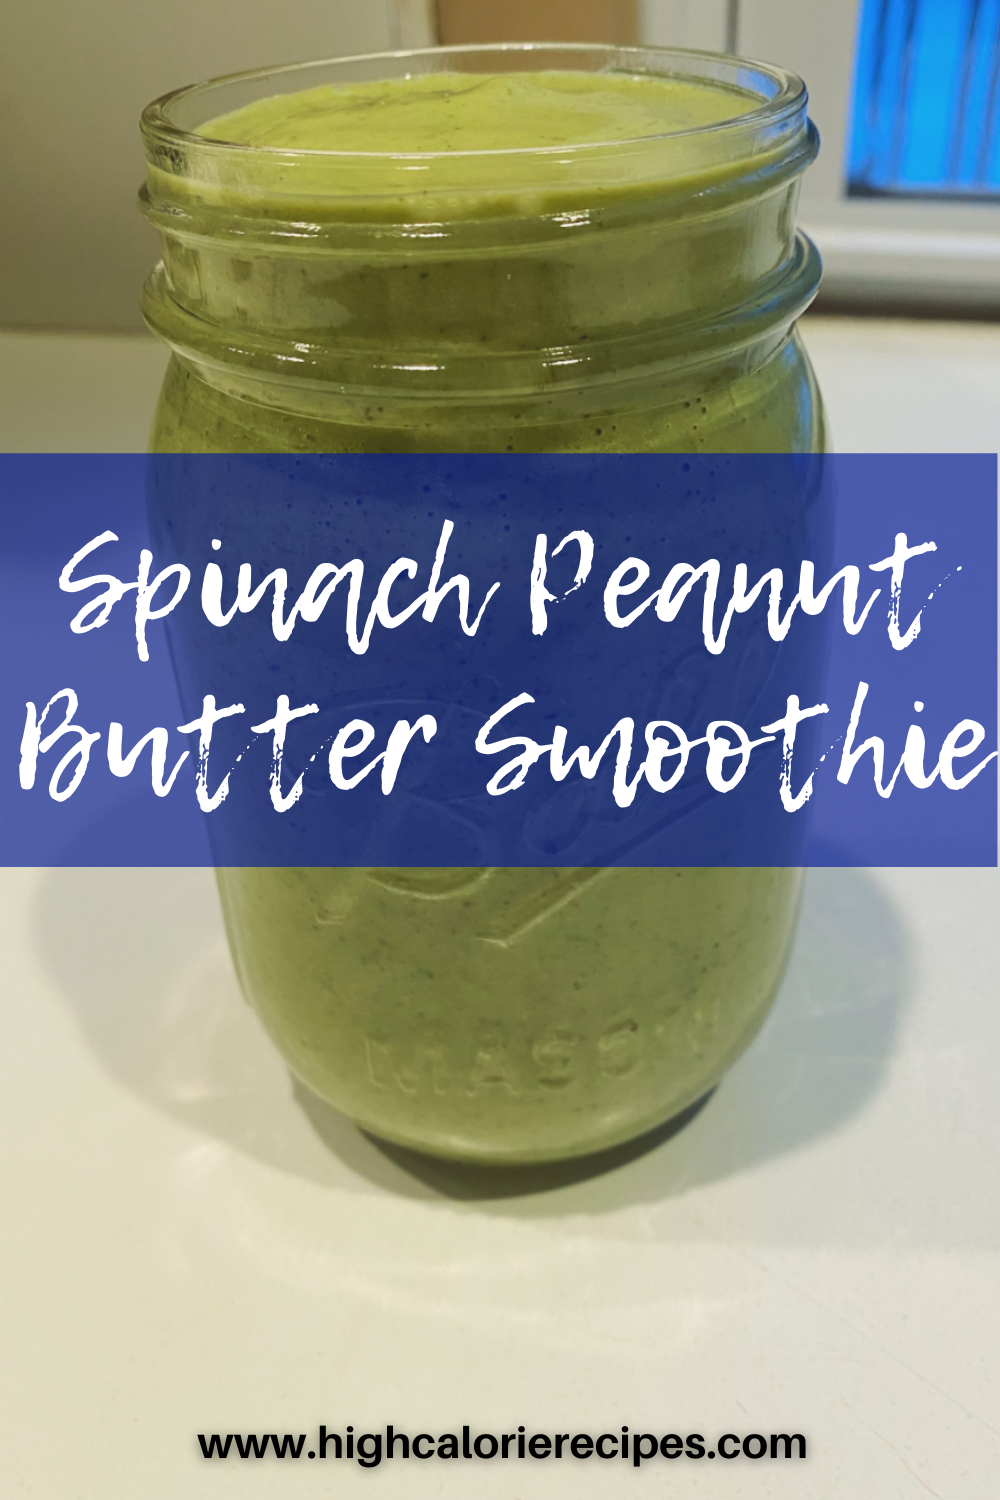 Spinach Peanut Butter Smoothie - High Calorie Recipes